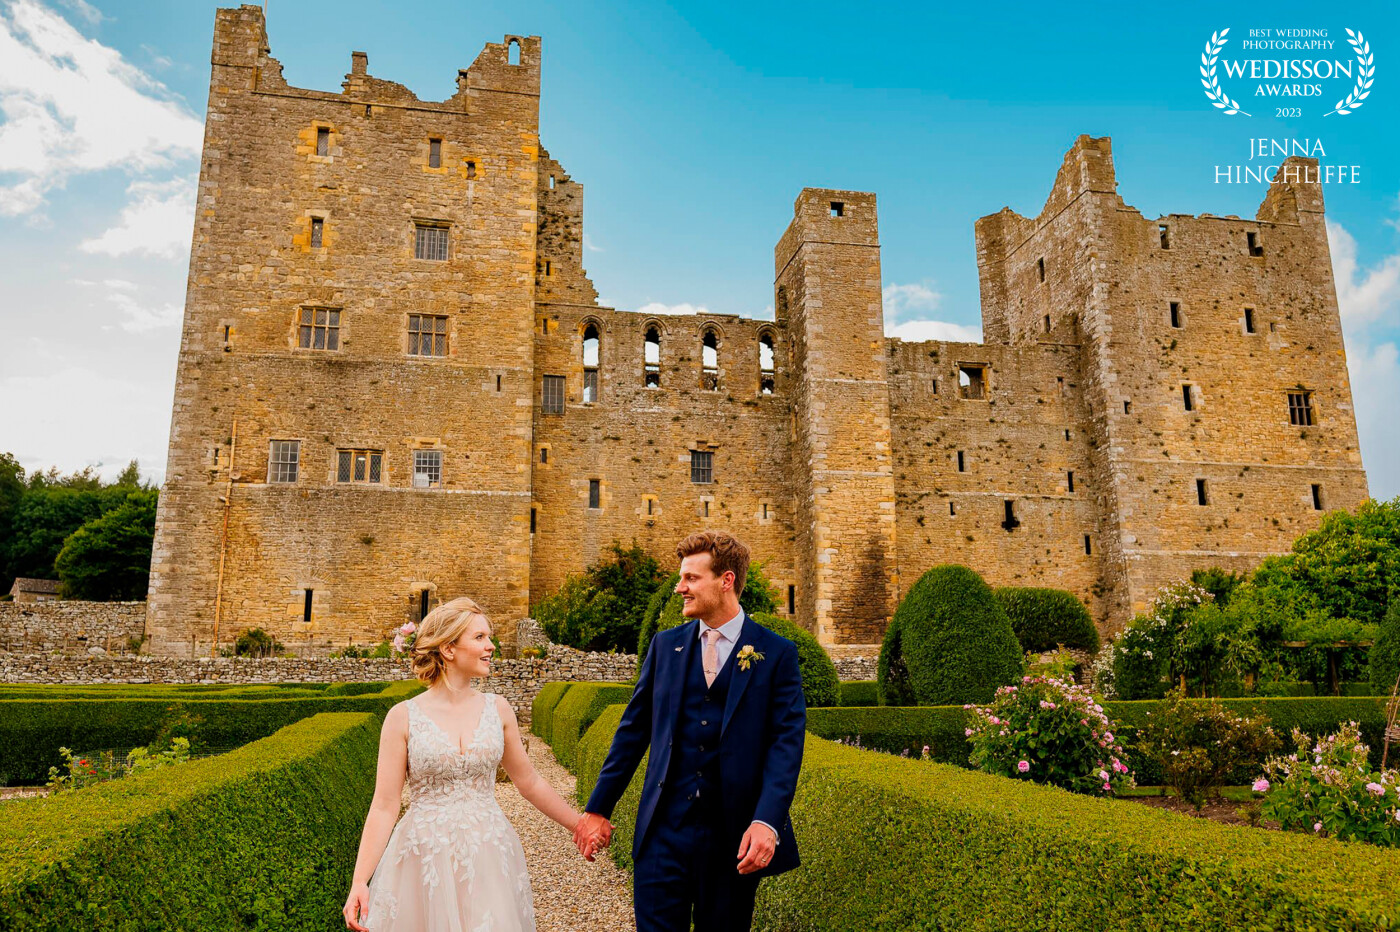 It had been raining all day so we waiting until evening for portraits. I really wanted to get the whole castle in shot as they loved their venue so much. The blue sky was a bonus!